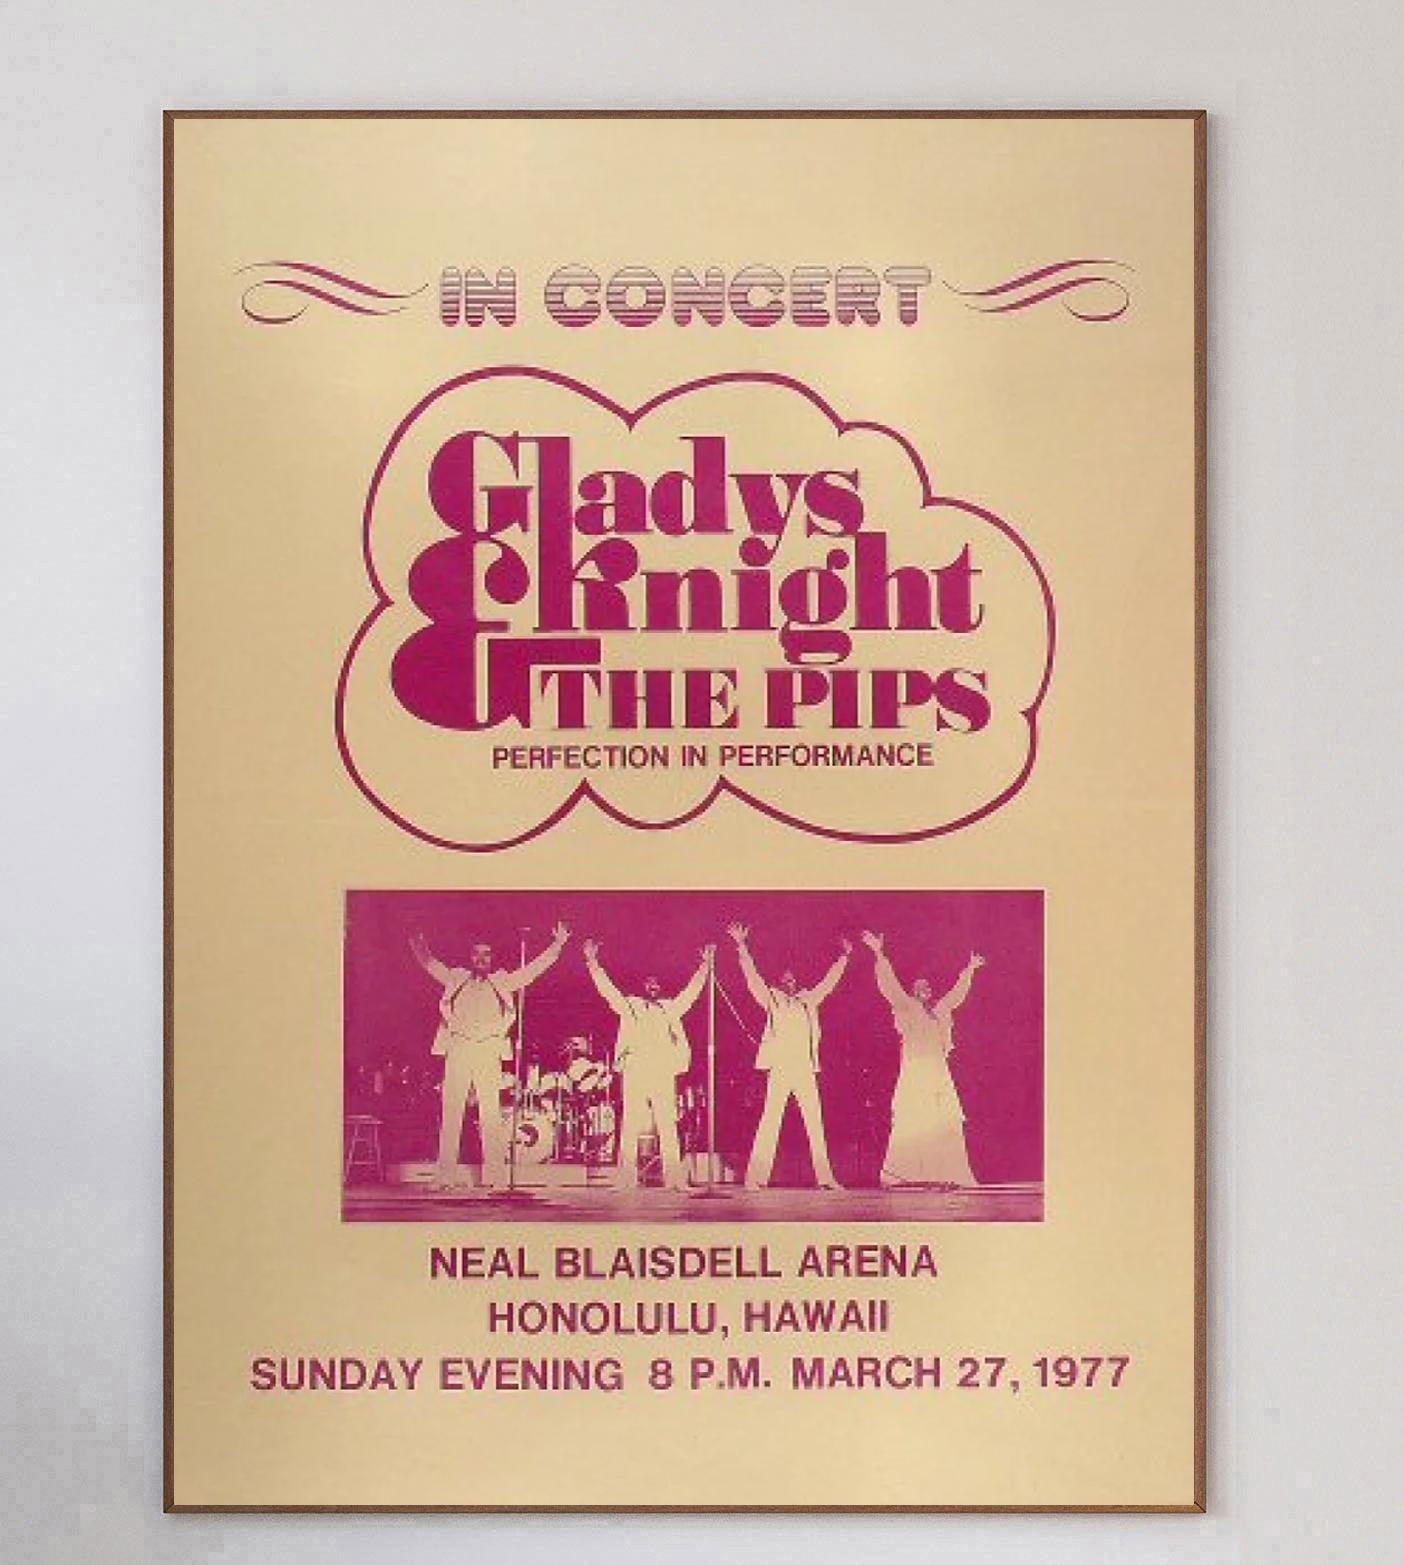 Great poster promoting Gladys Knight & the Pips show at the Neal Blaisdell Arena in Honolulu, Hawaii on March 27th 1977. Founded in the early 1950s, Gladys Knight & the Pips had countless hits such as 